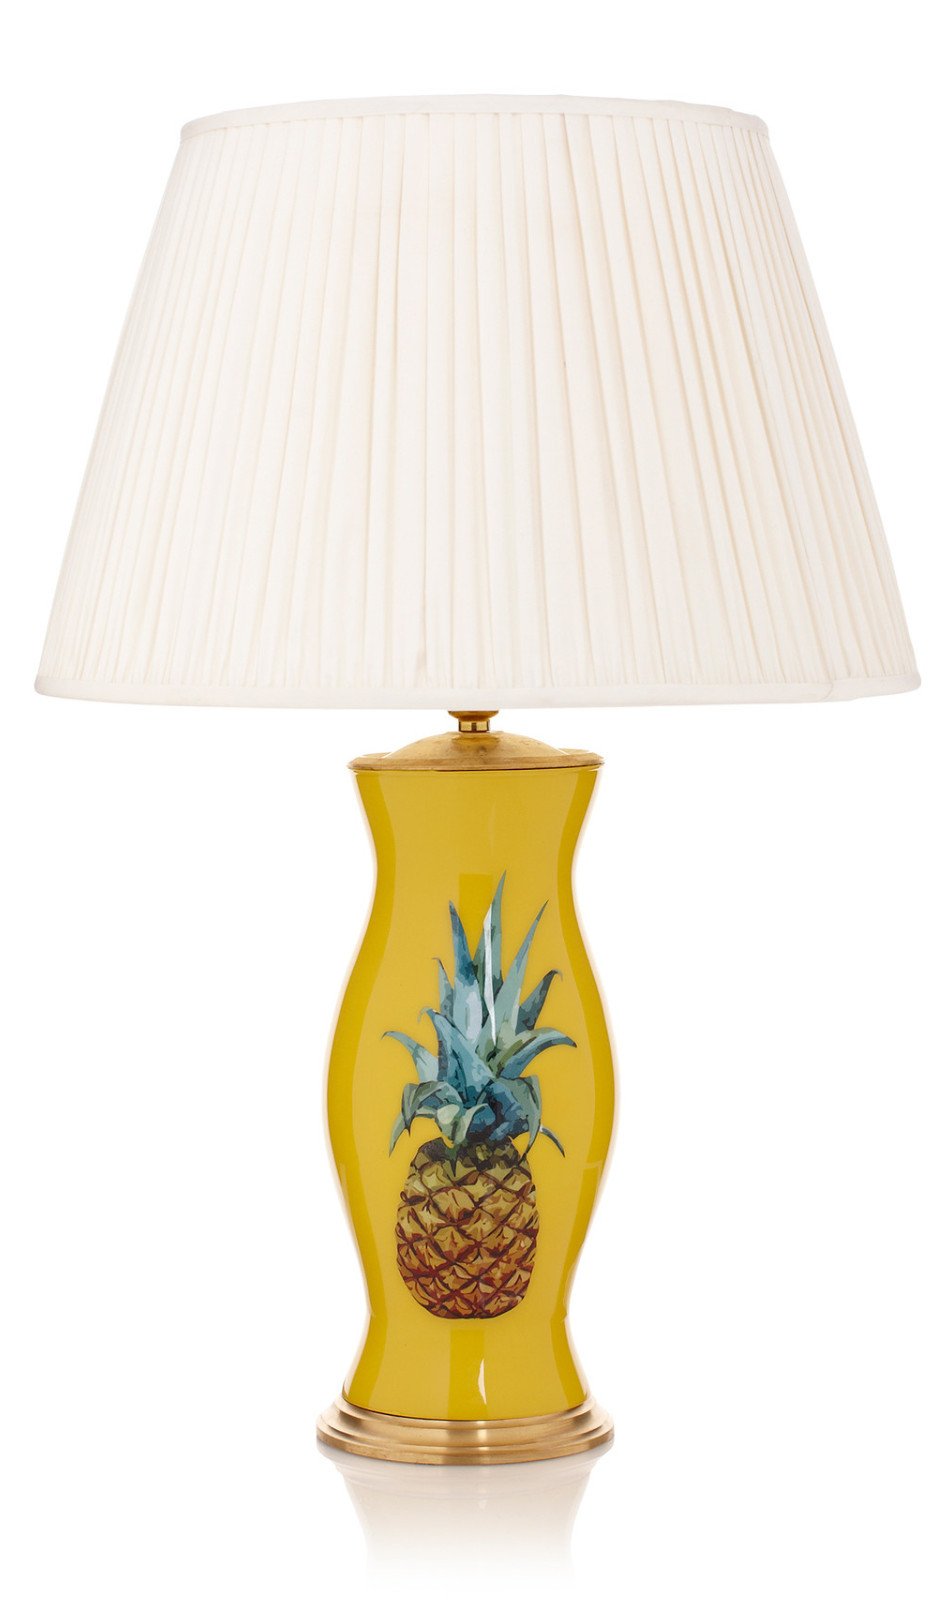 Yellow table lamp with pineapple pattern, adding a tropical touch to any room decor.